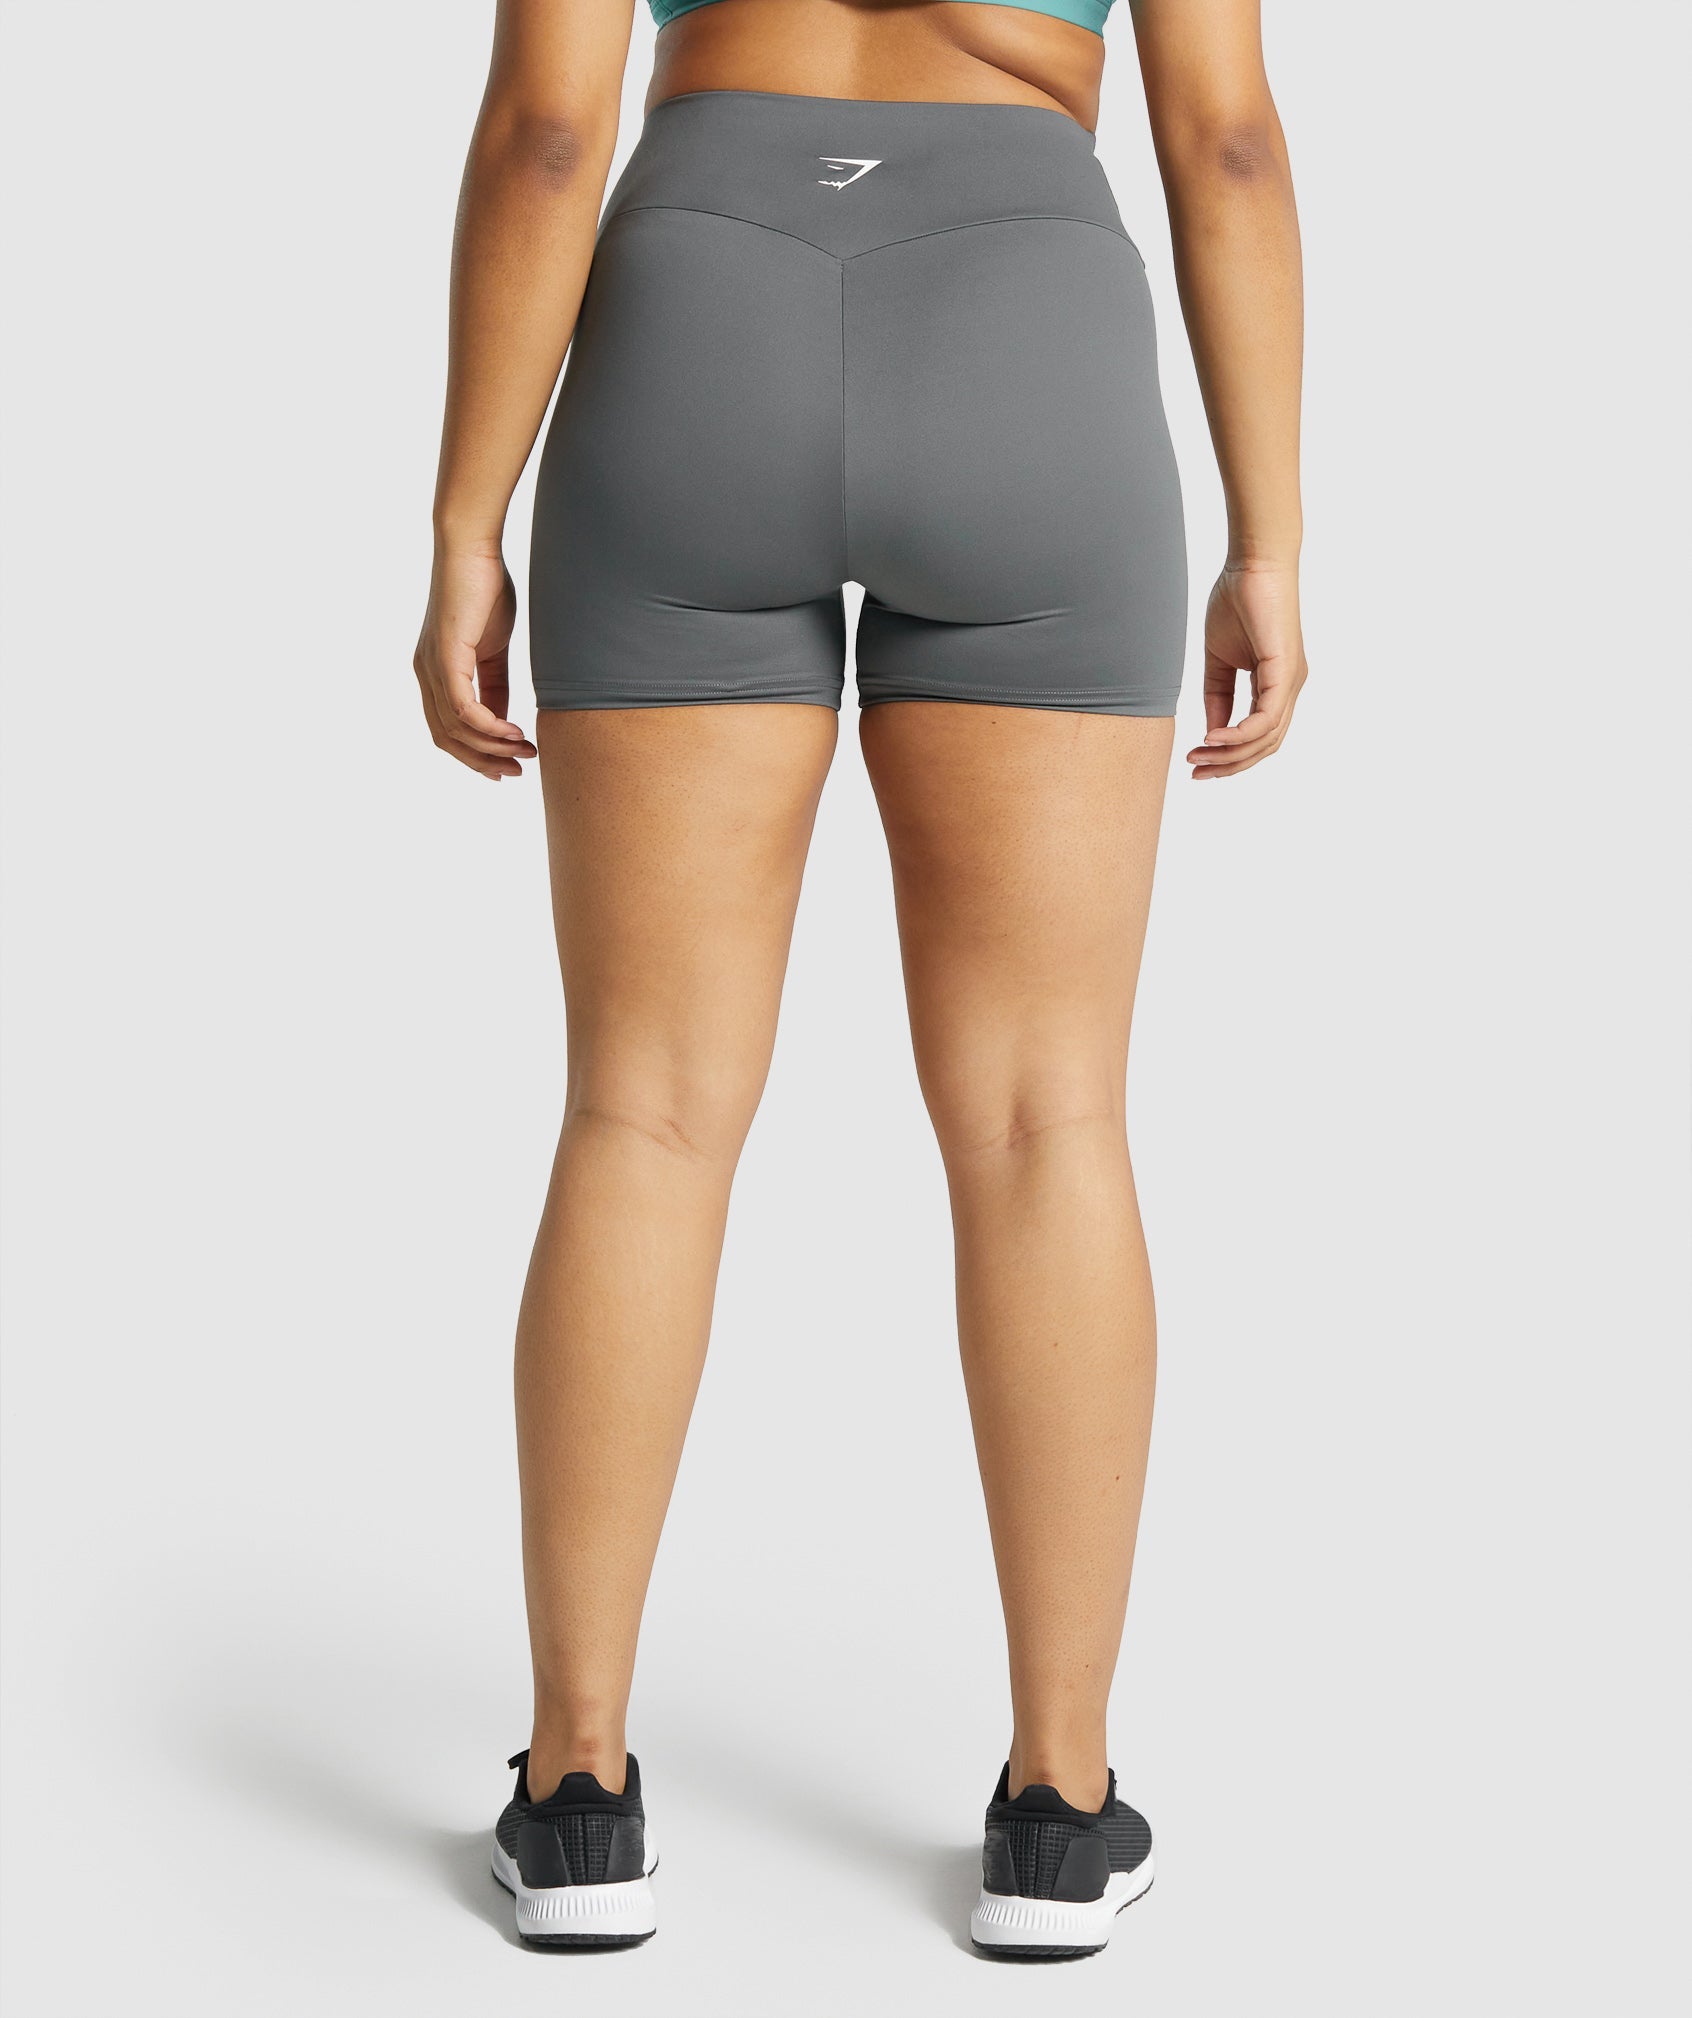 Training Shorts in Charcoal Grey